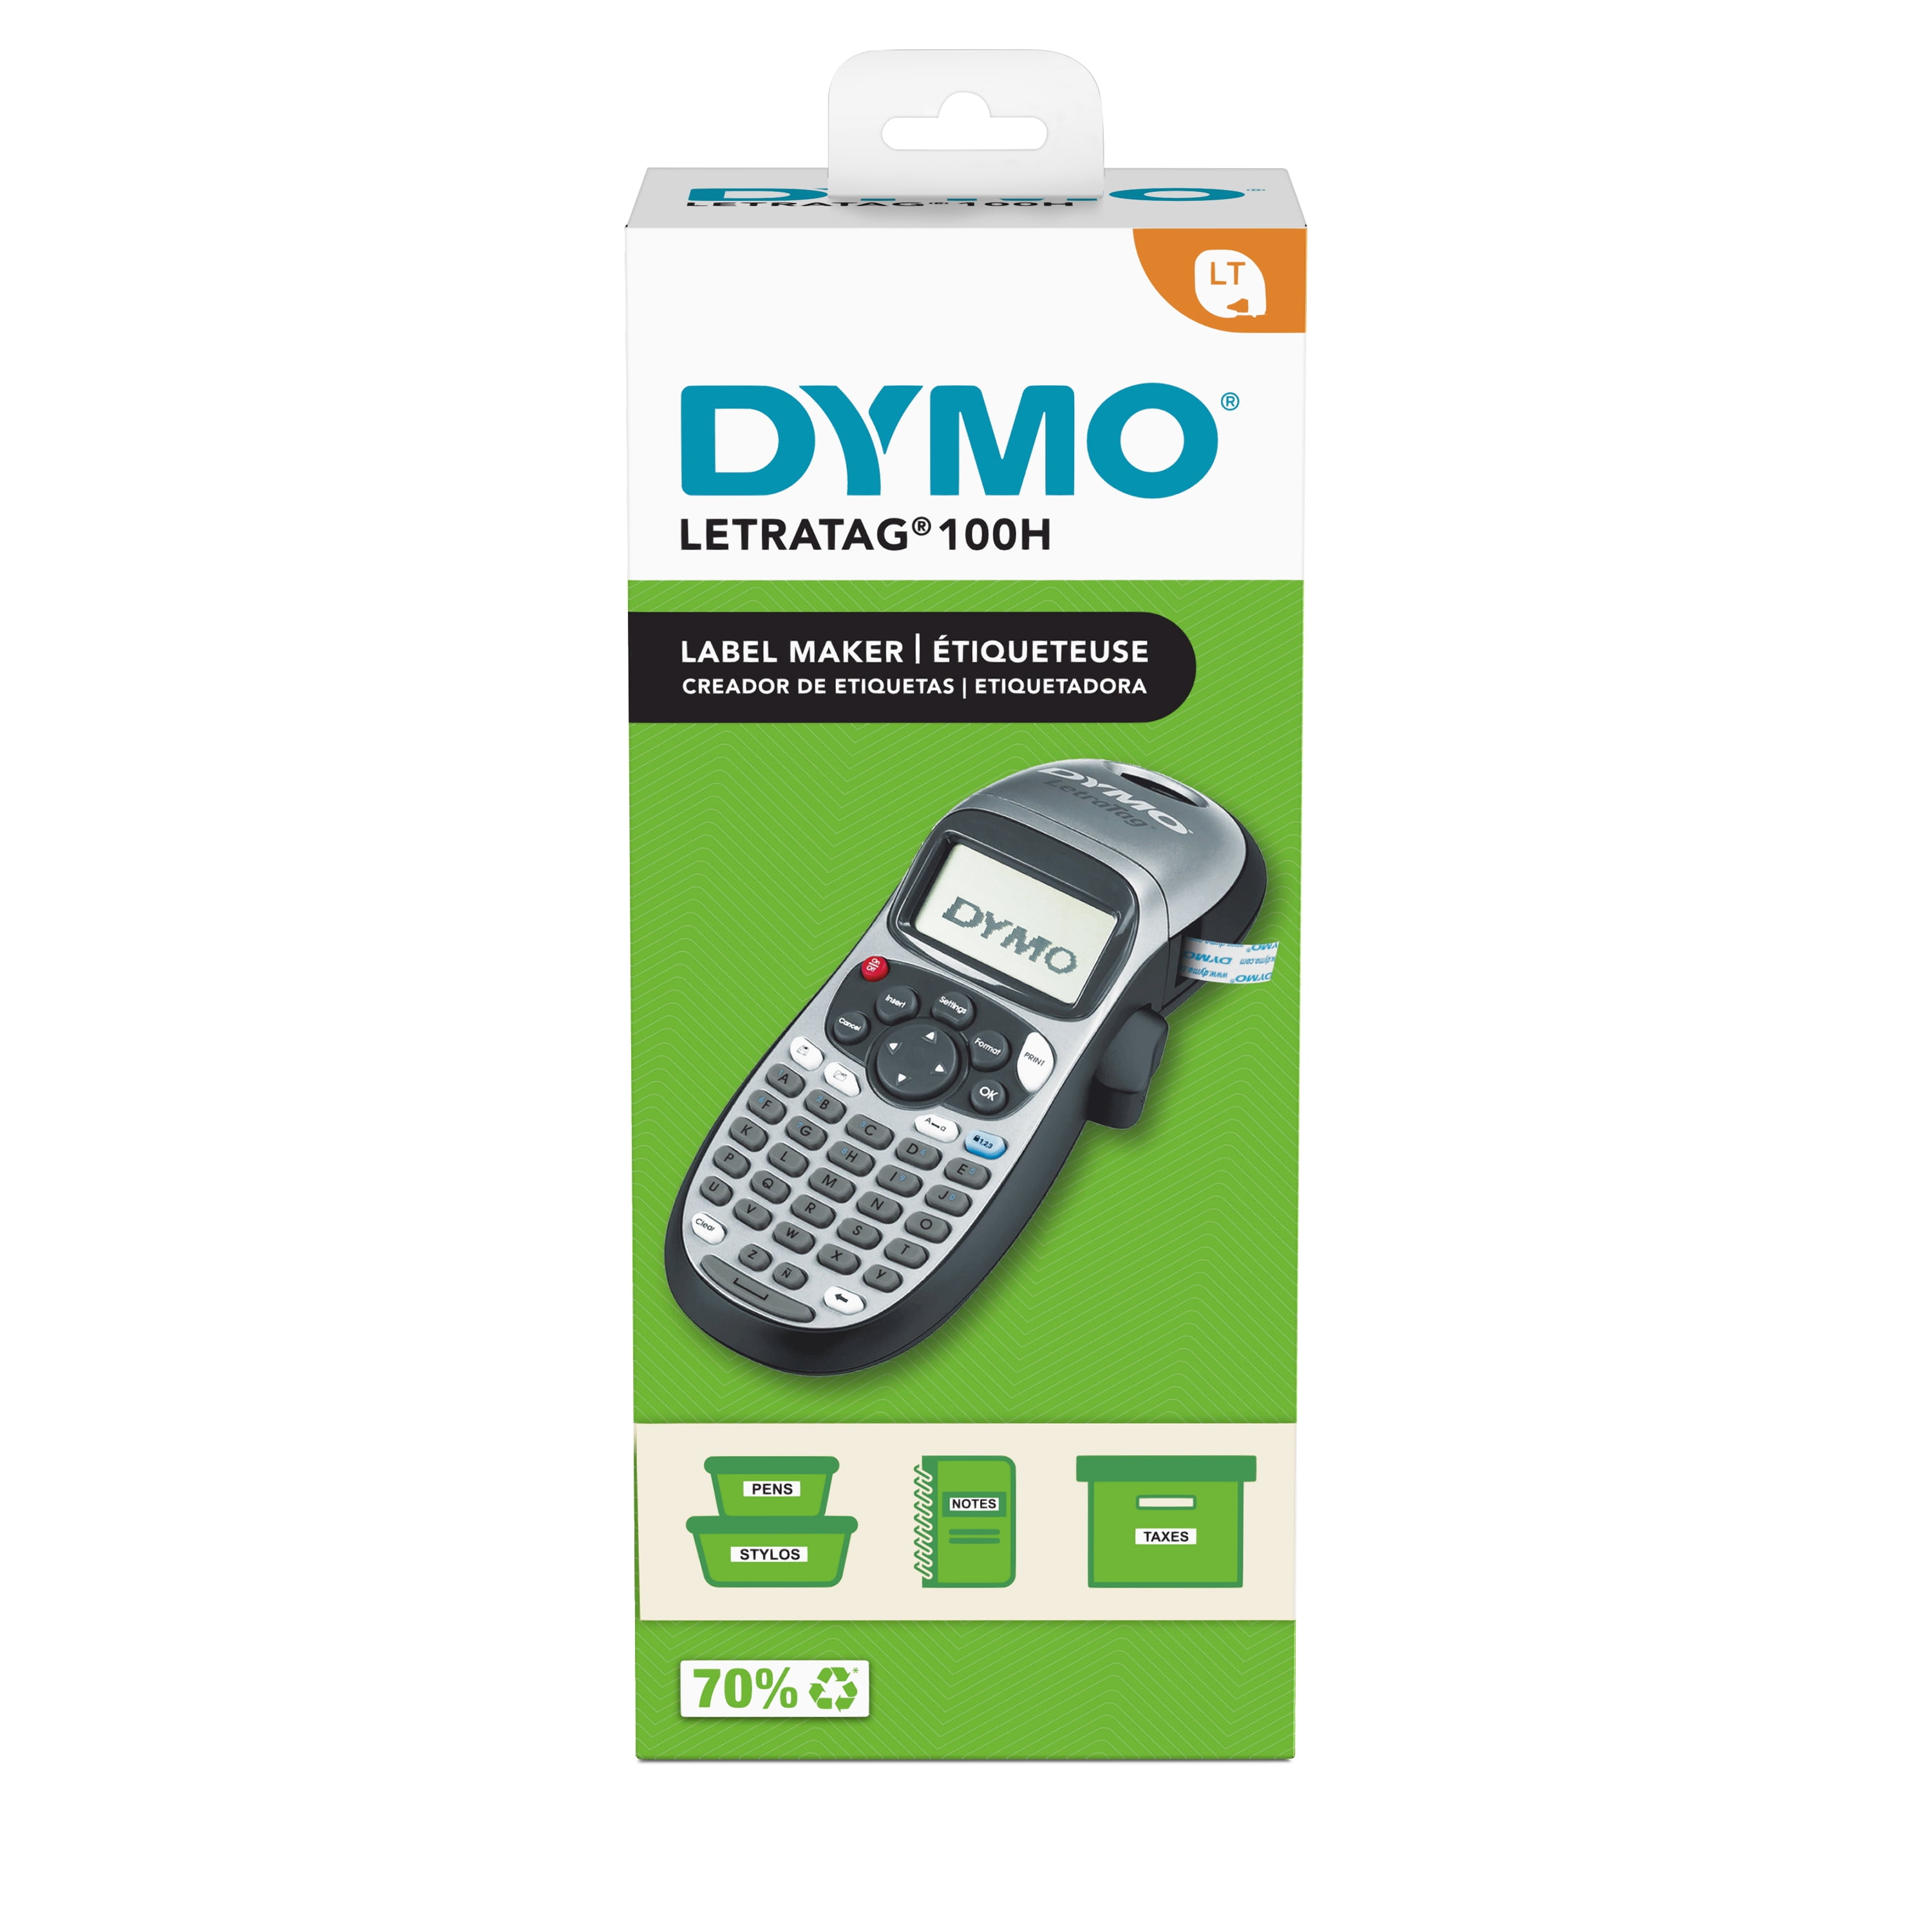 Canboc Hard Carrying Case for DYMO LetraTag 200B Bluetooth Label Maker,  Compact Bluetooth Wireless Label Printer Case Fits Label Tapes and  Batteries